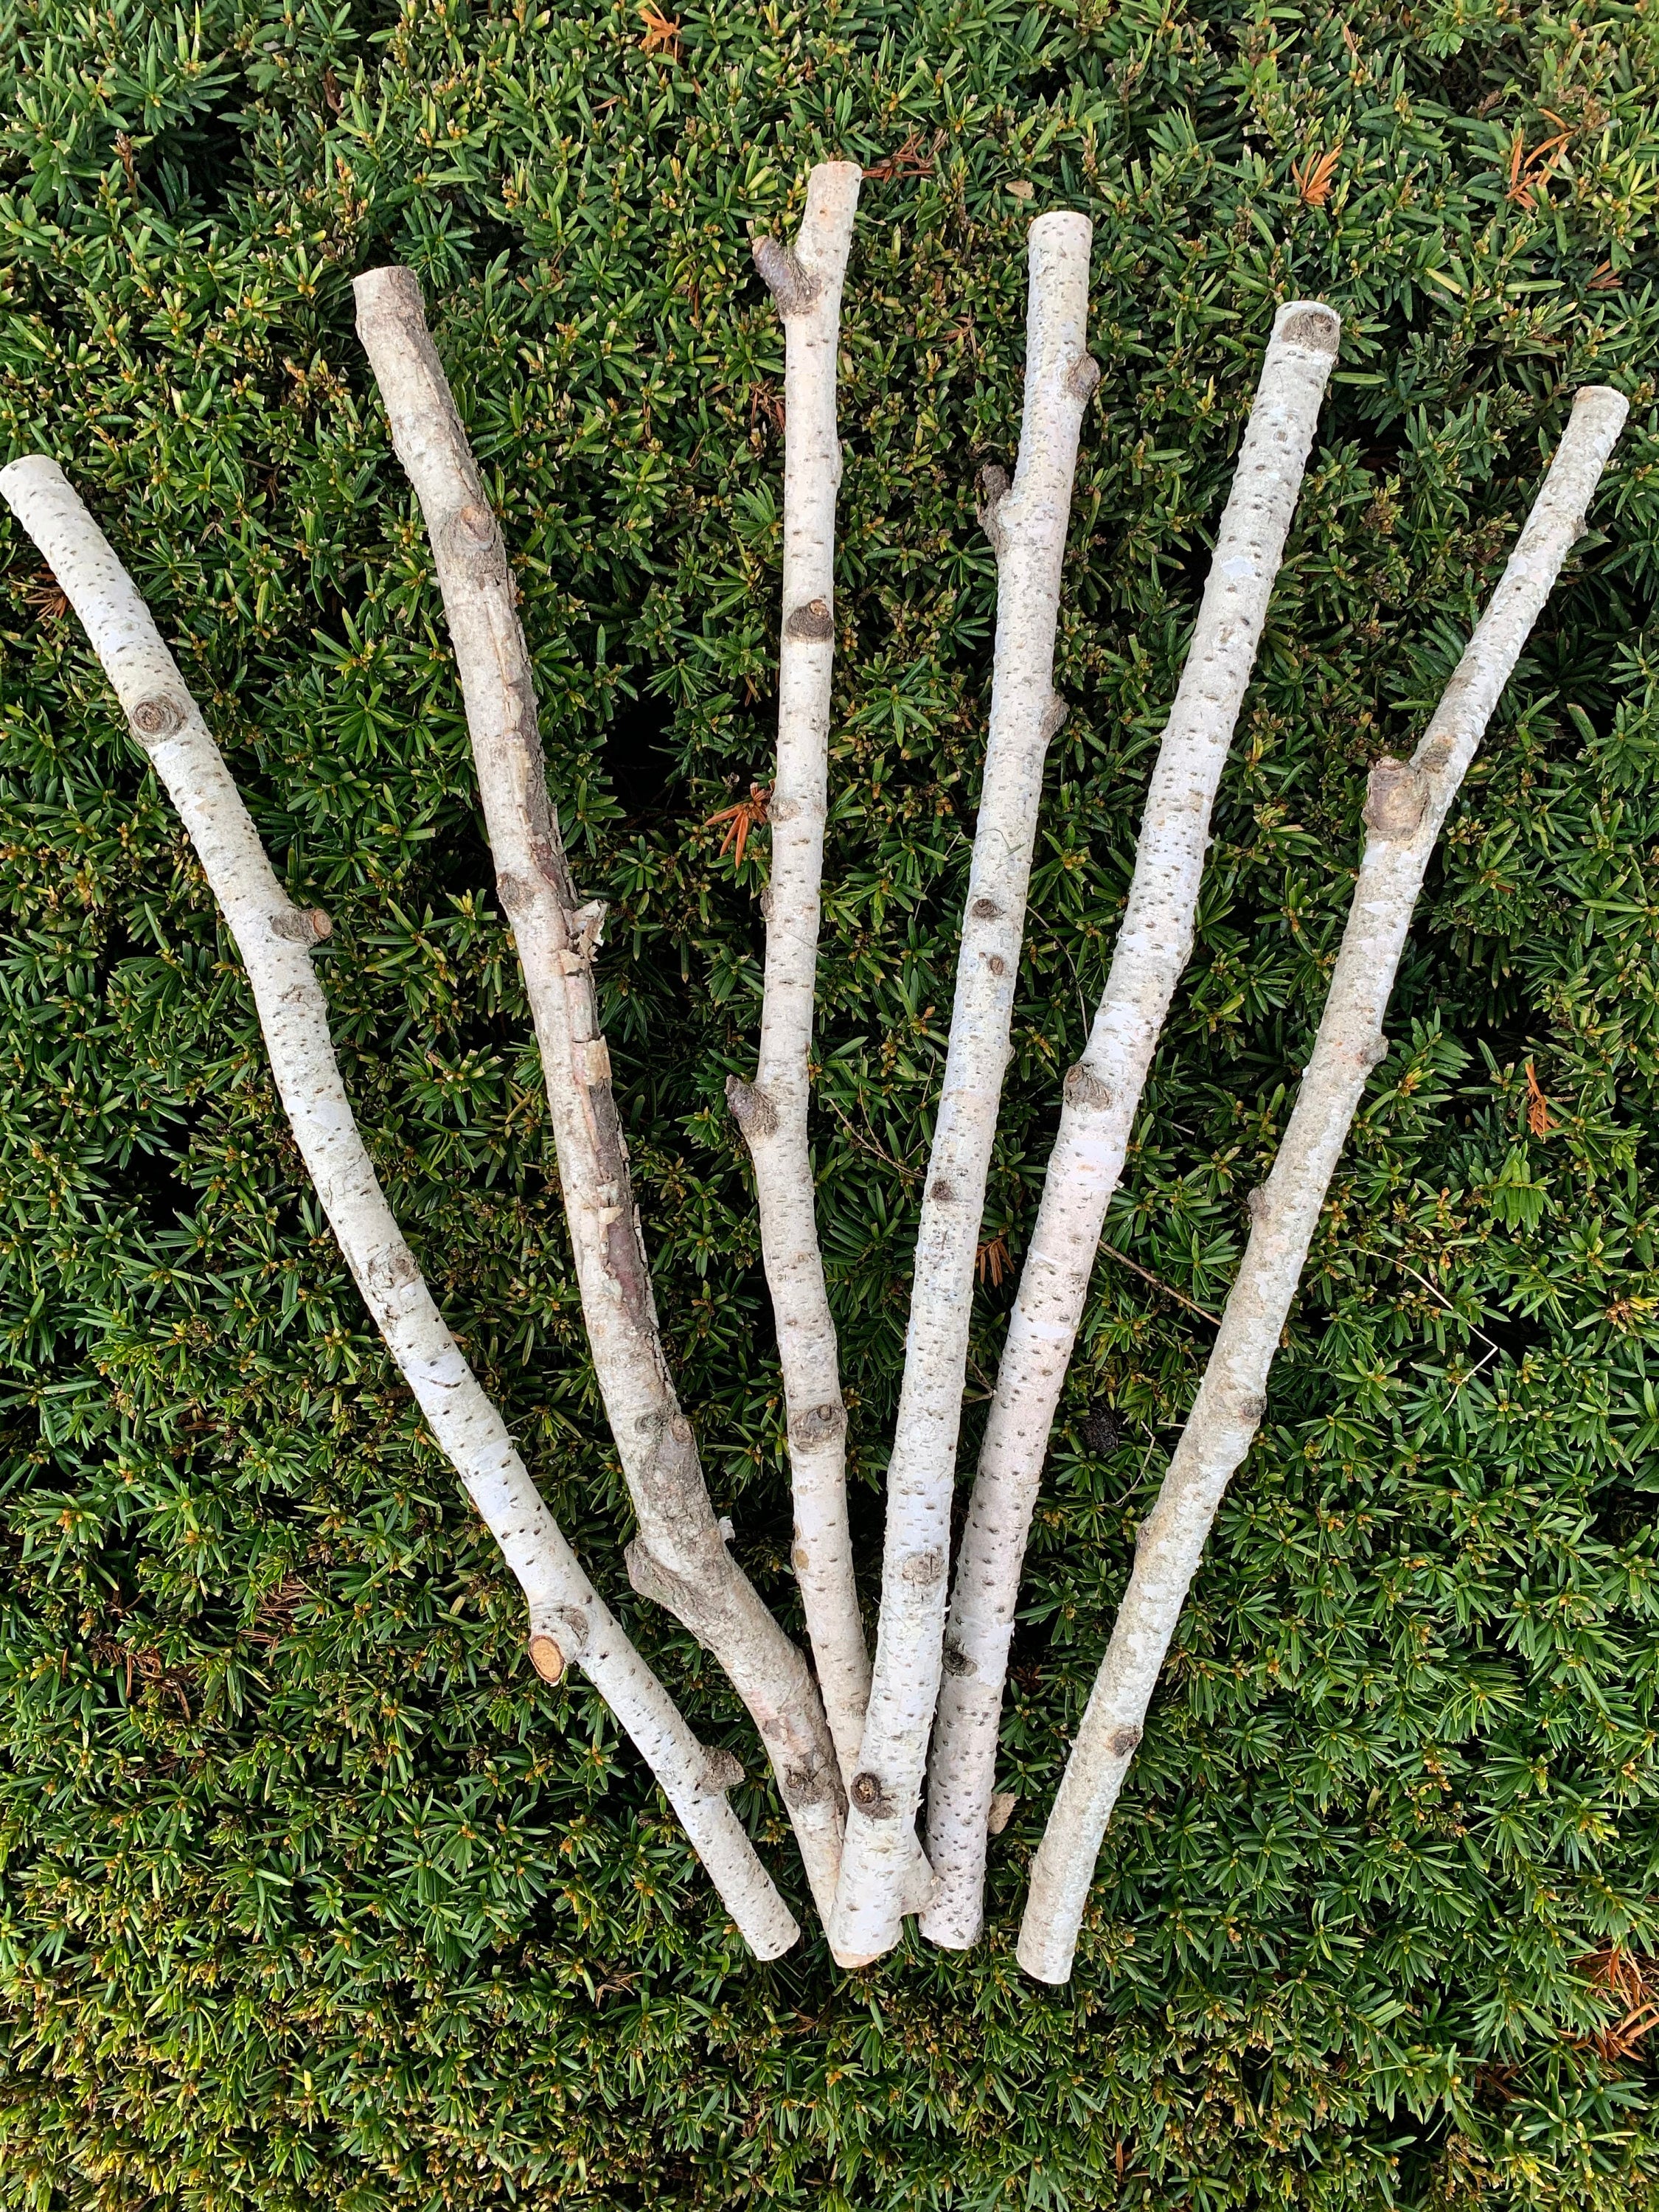 White Birch Branches, 6 count, 20 inches in length, 1/2 - 1 inch diameter